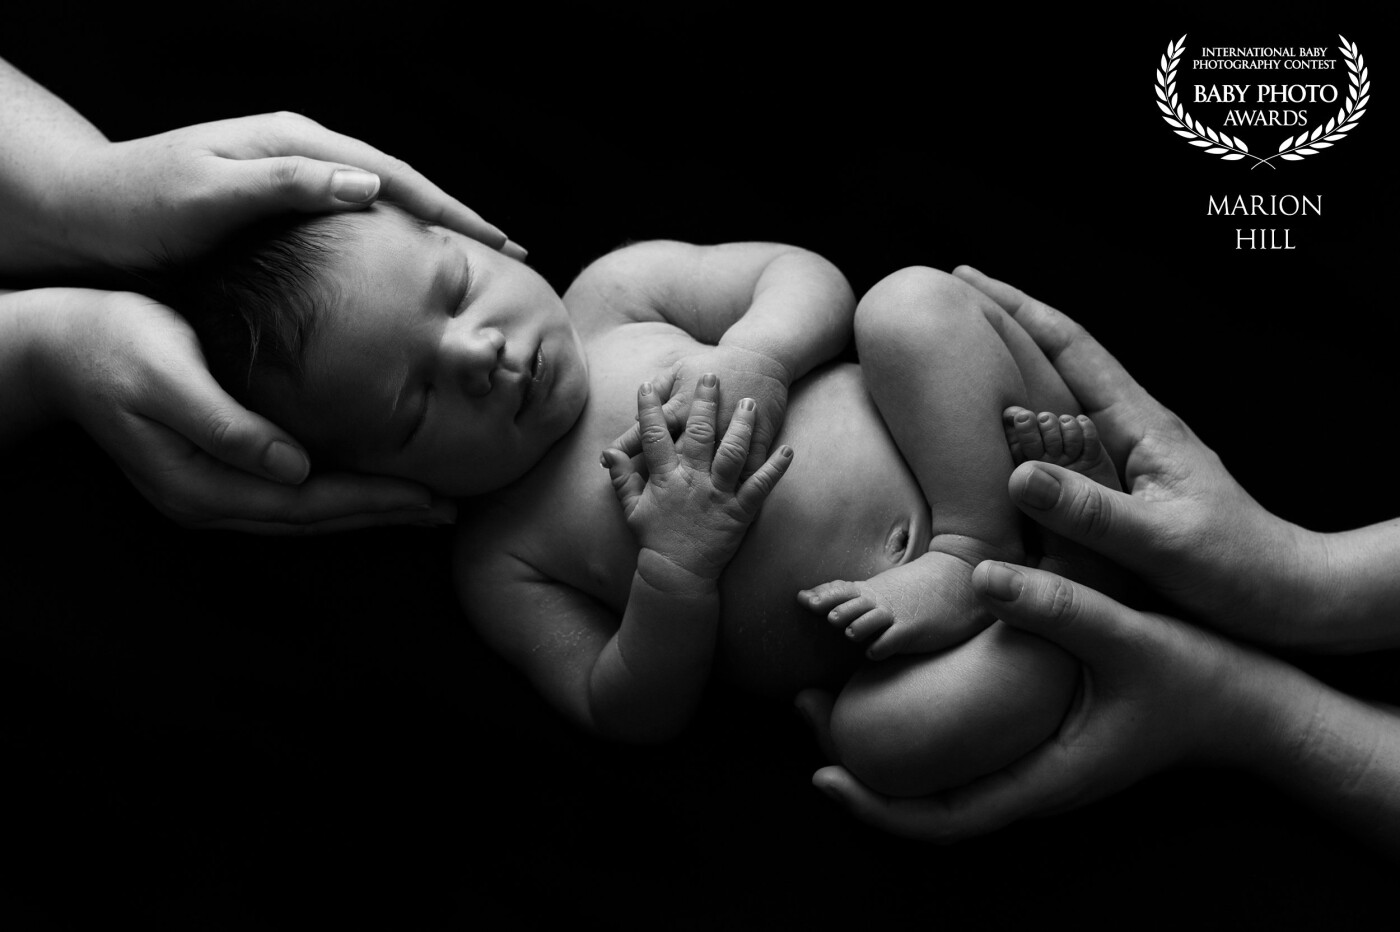 This session was with two fantastic women who had reached the culmination of a lengthy journey to have a child together in the form of this beautiful baby boy.<br />
<br />
In this image I wanted to try and show the wonderful connection there was between them all. The baby boy was so calm through out. The session was a real joy.